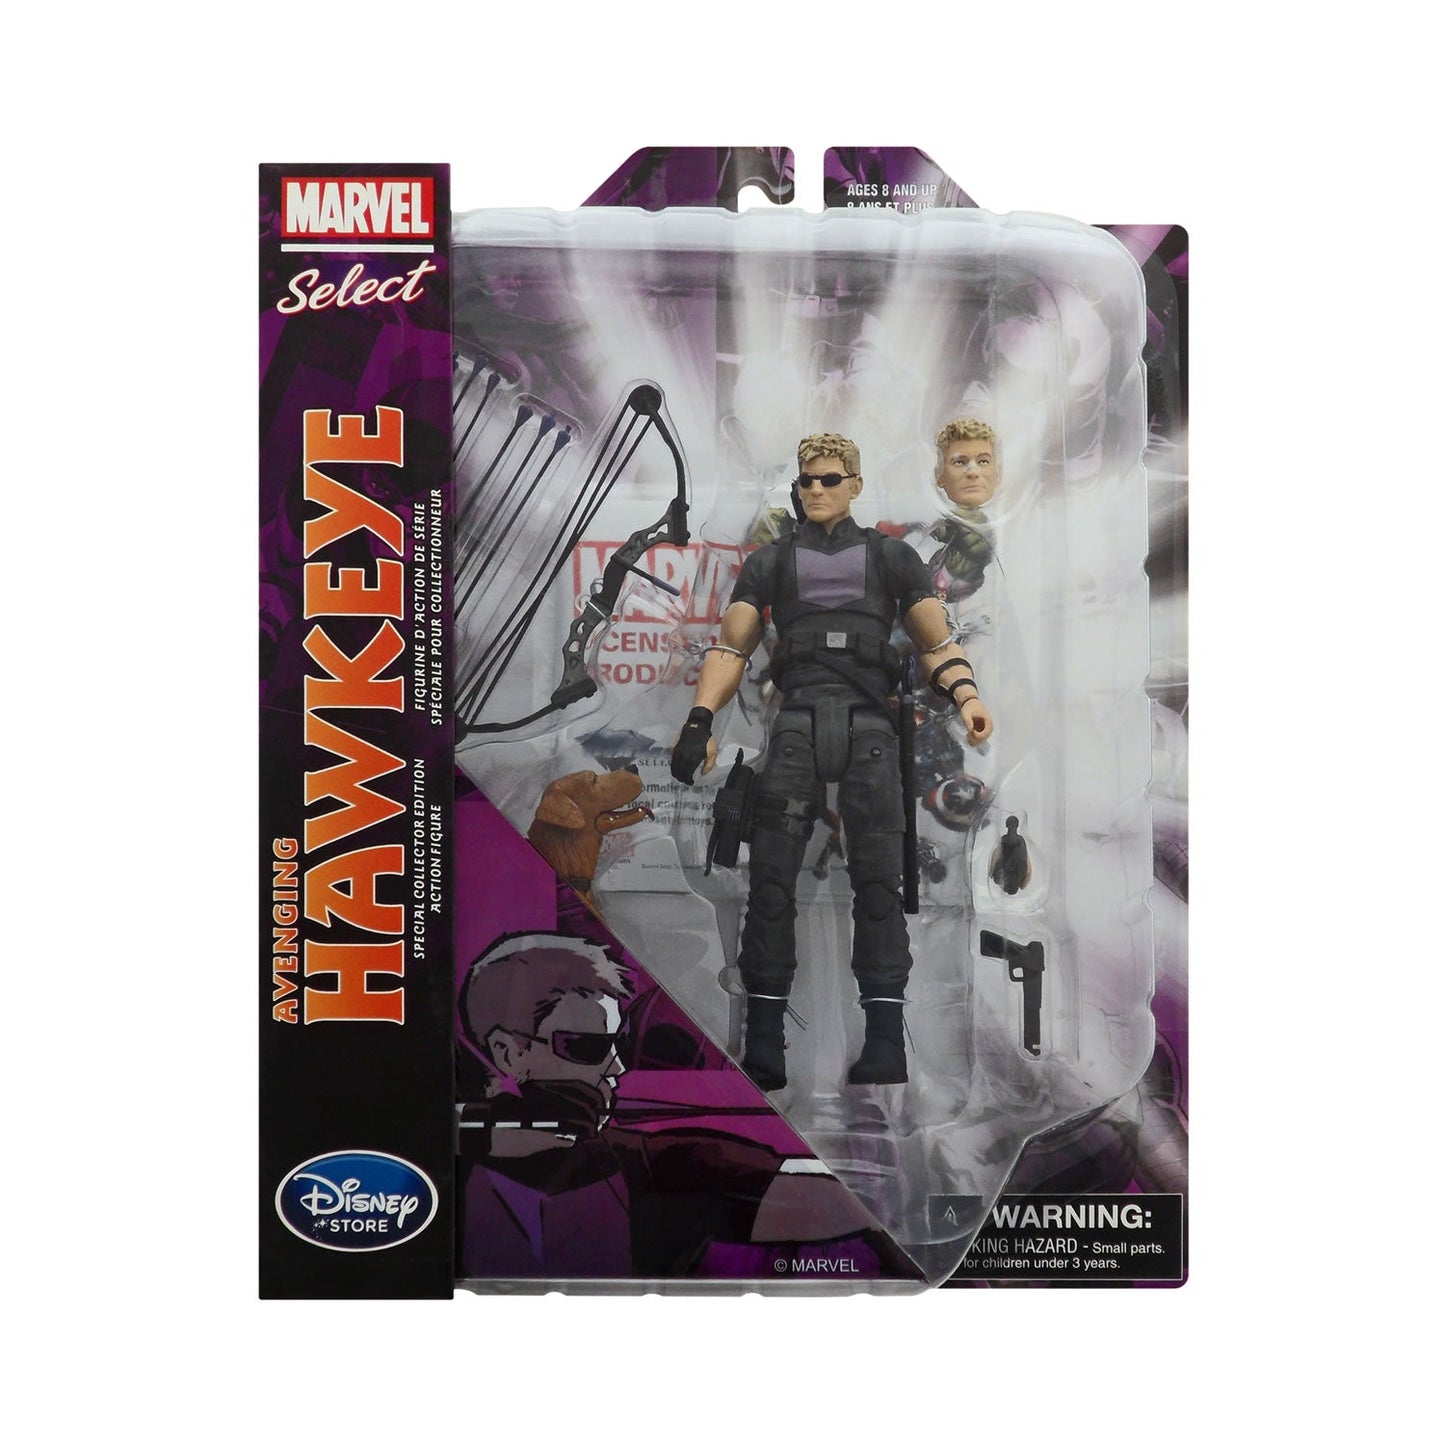 Marvel Select Exclusive Avenging Hawkeye (Blond Hair) Action Figure